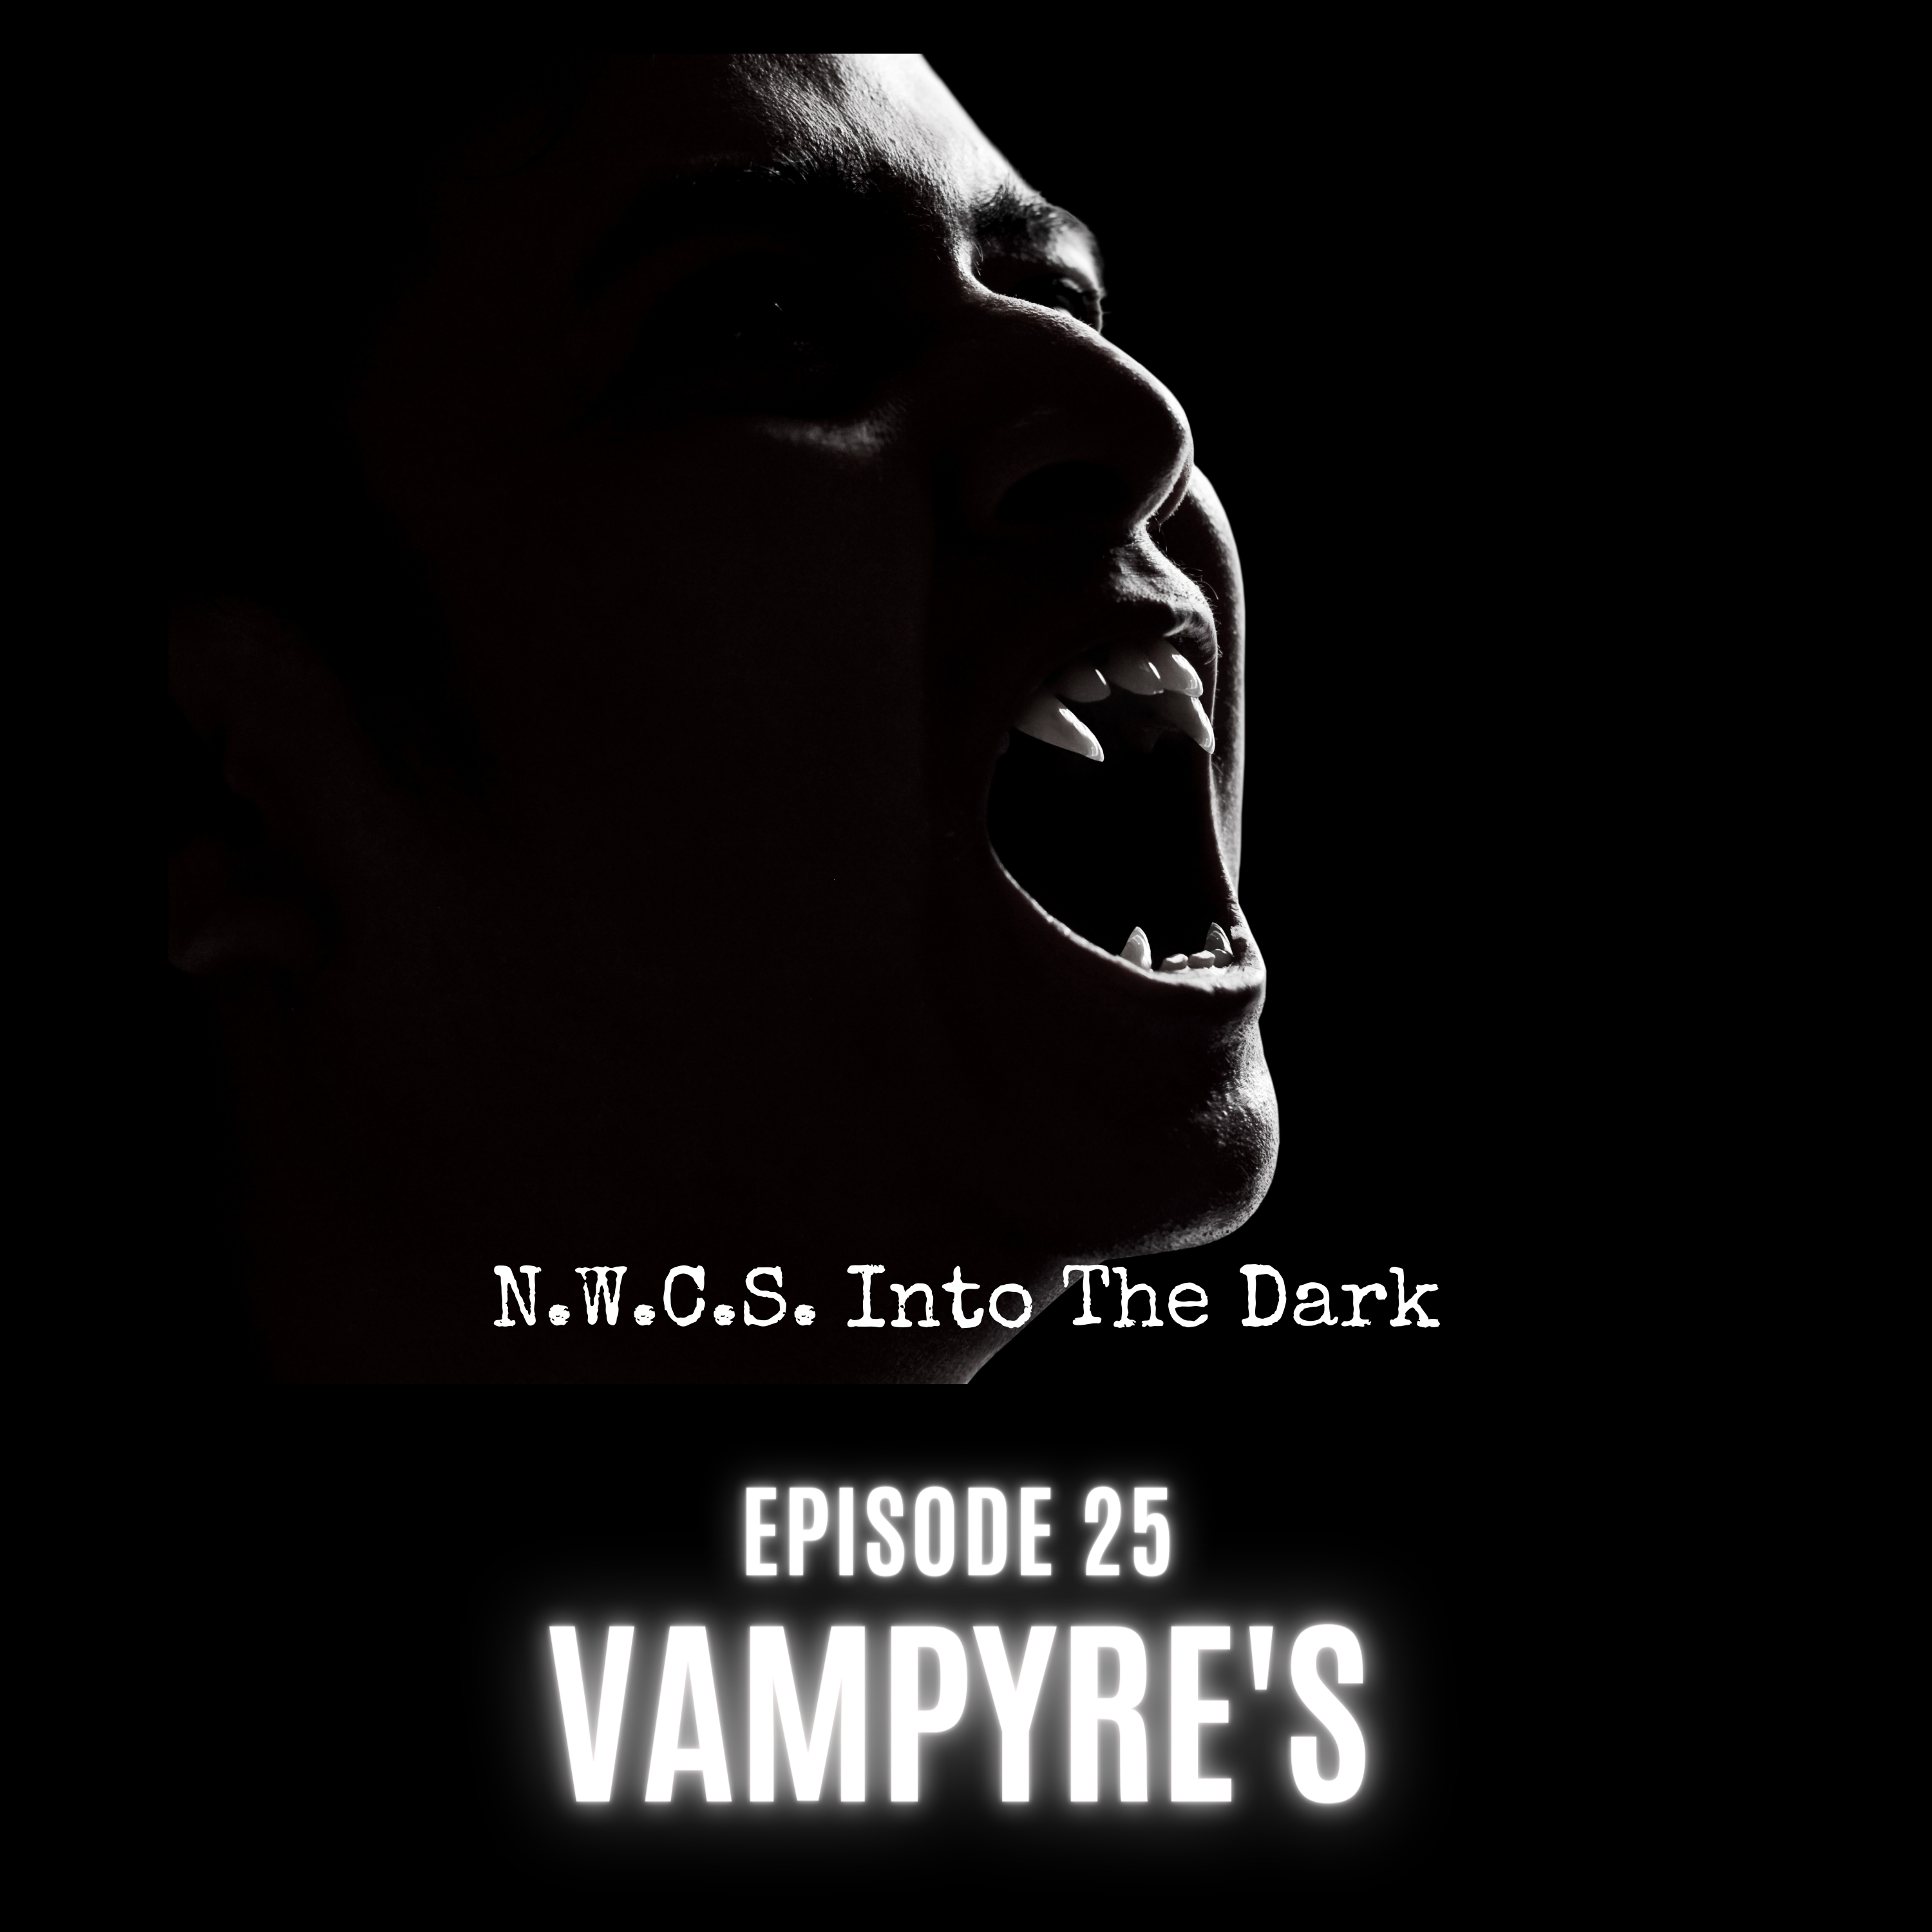 NWCS - Into The Dark - Episode 25 Vampyre's